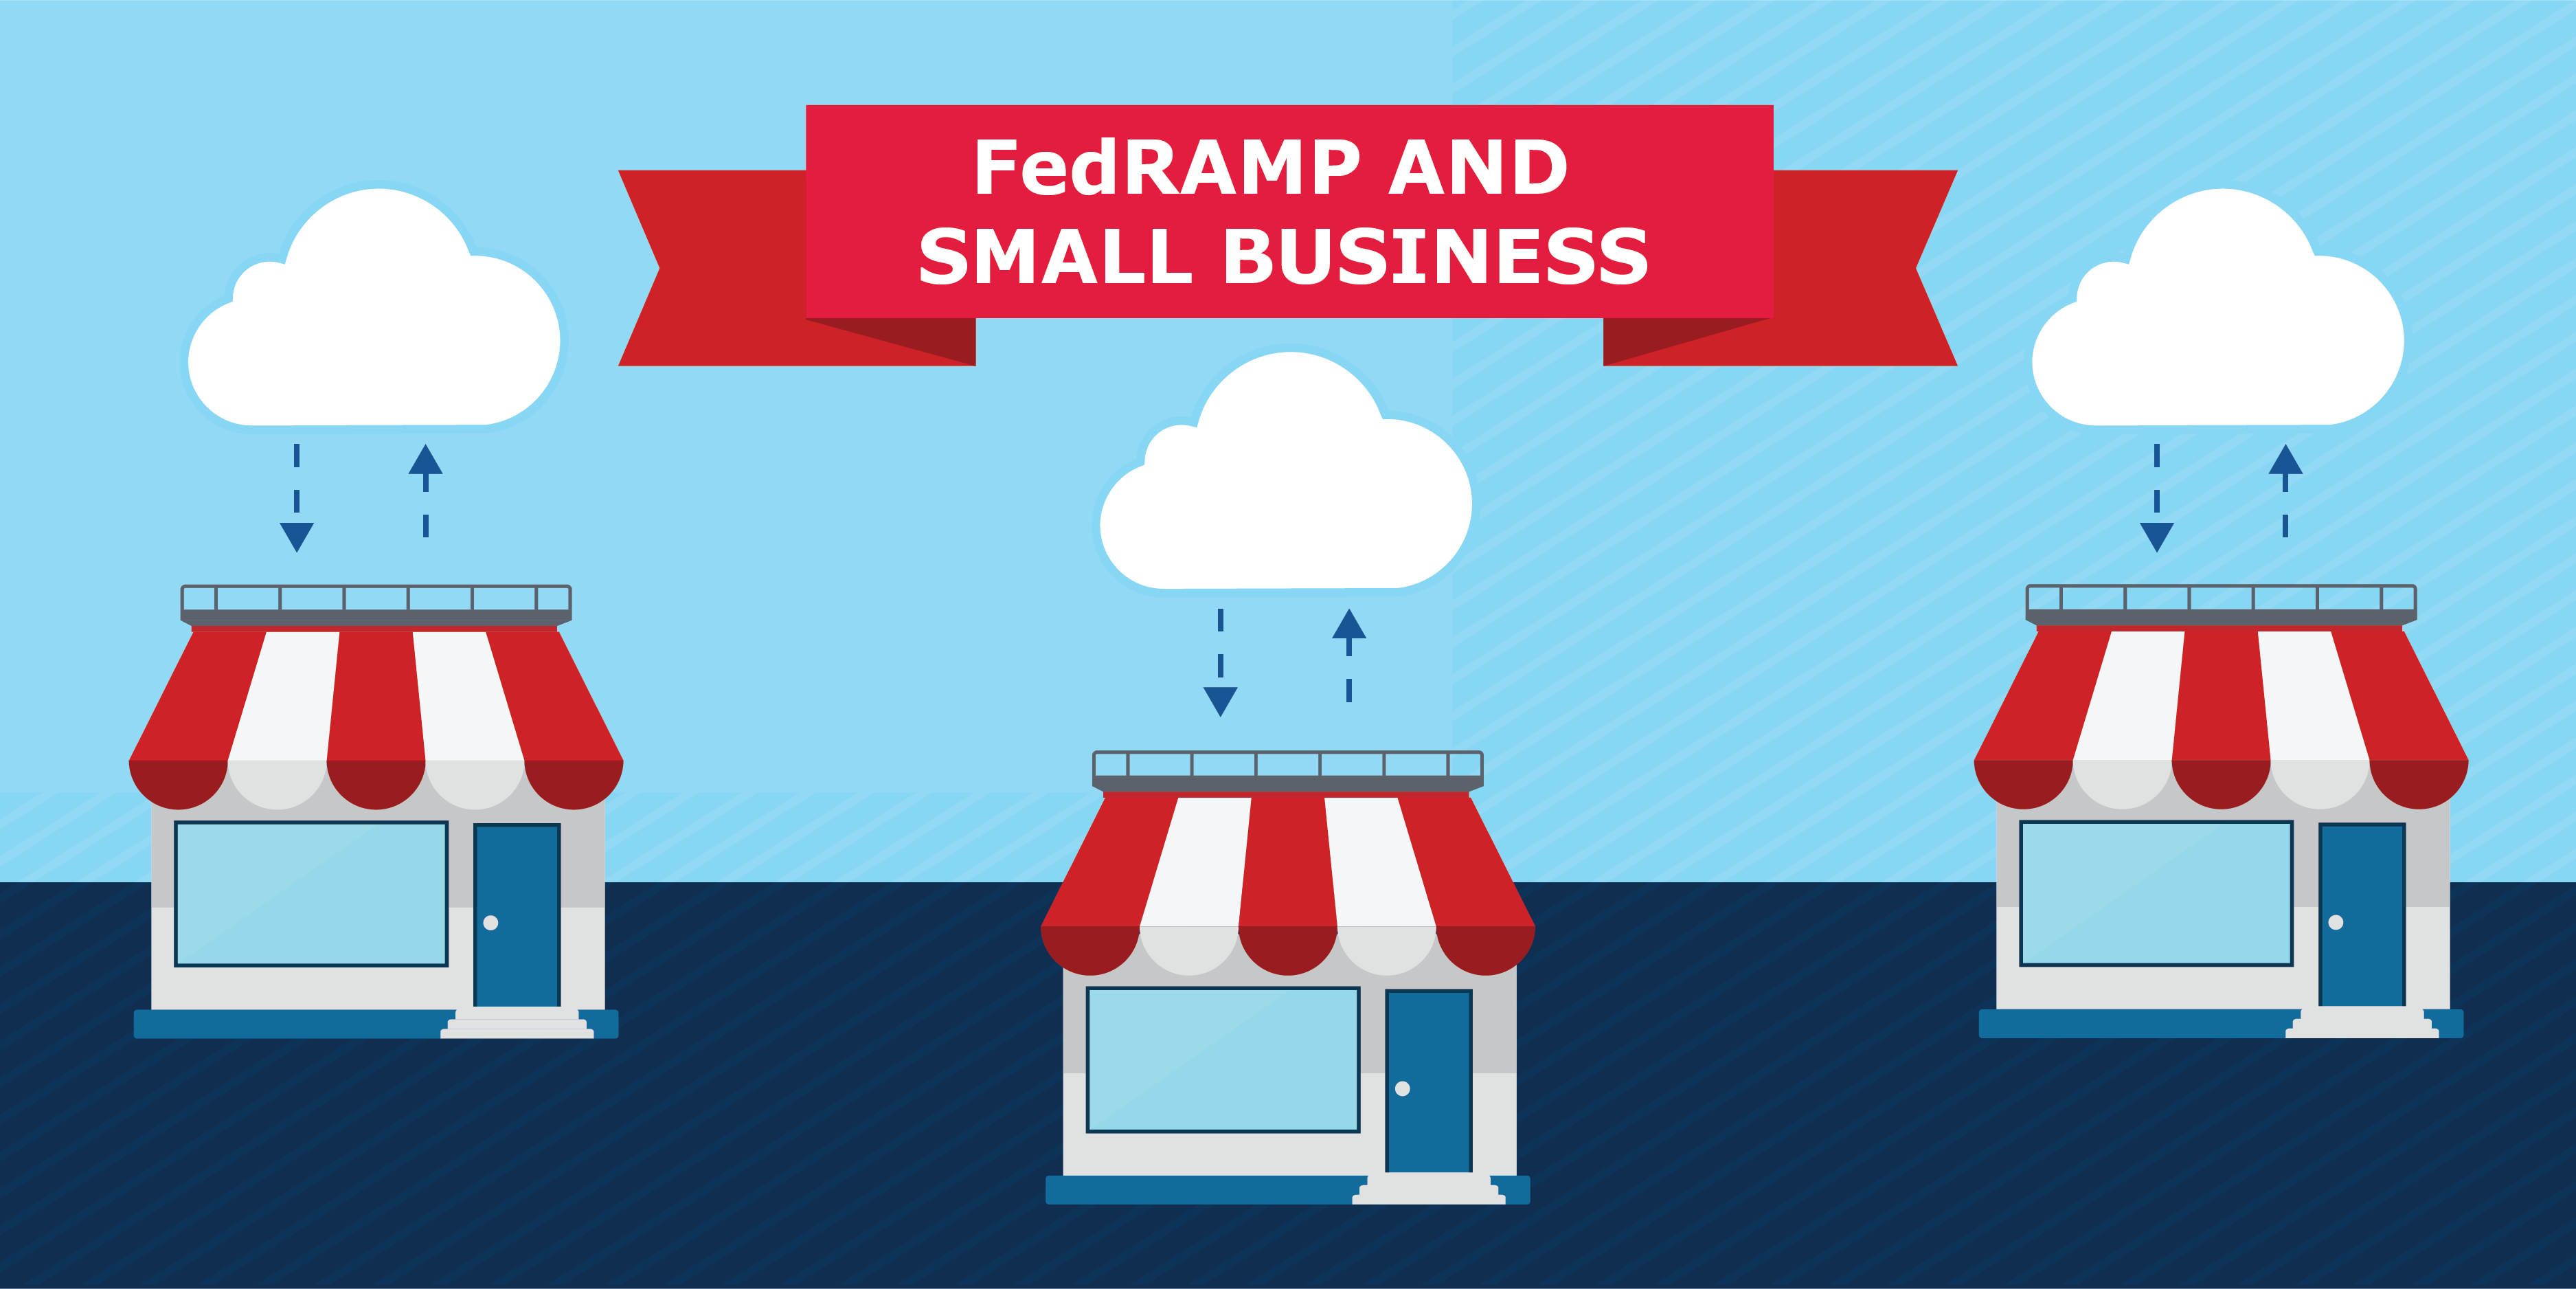 Impact of FedRAMP for Small Businesses